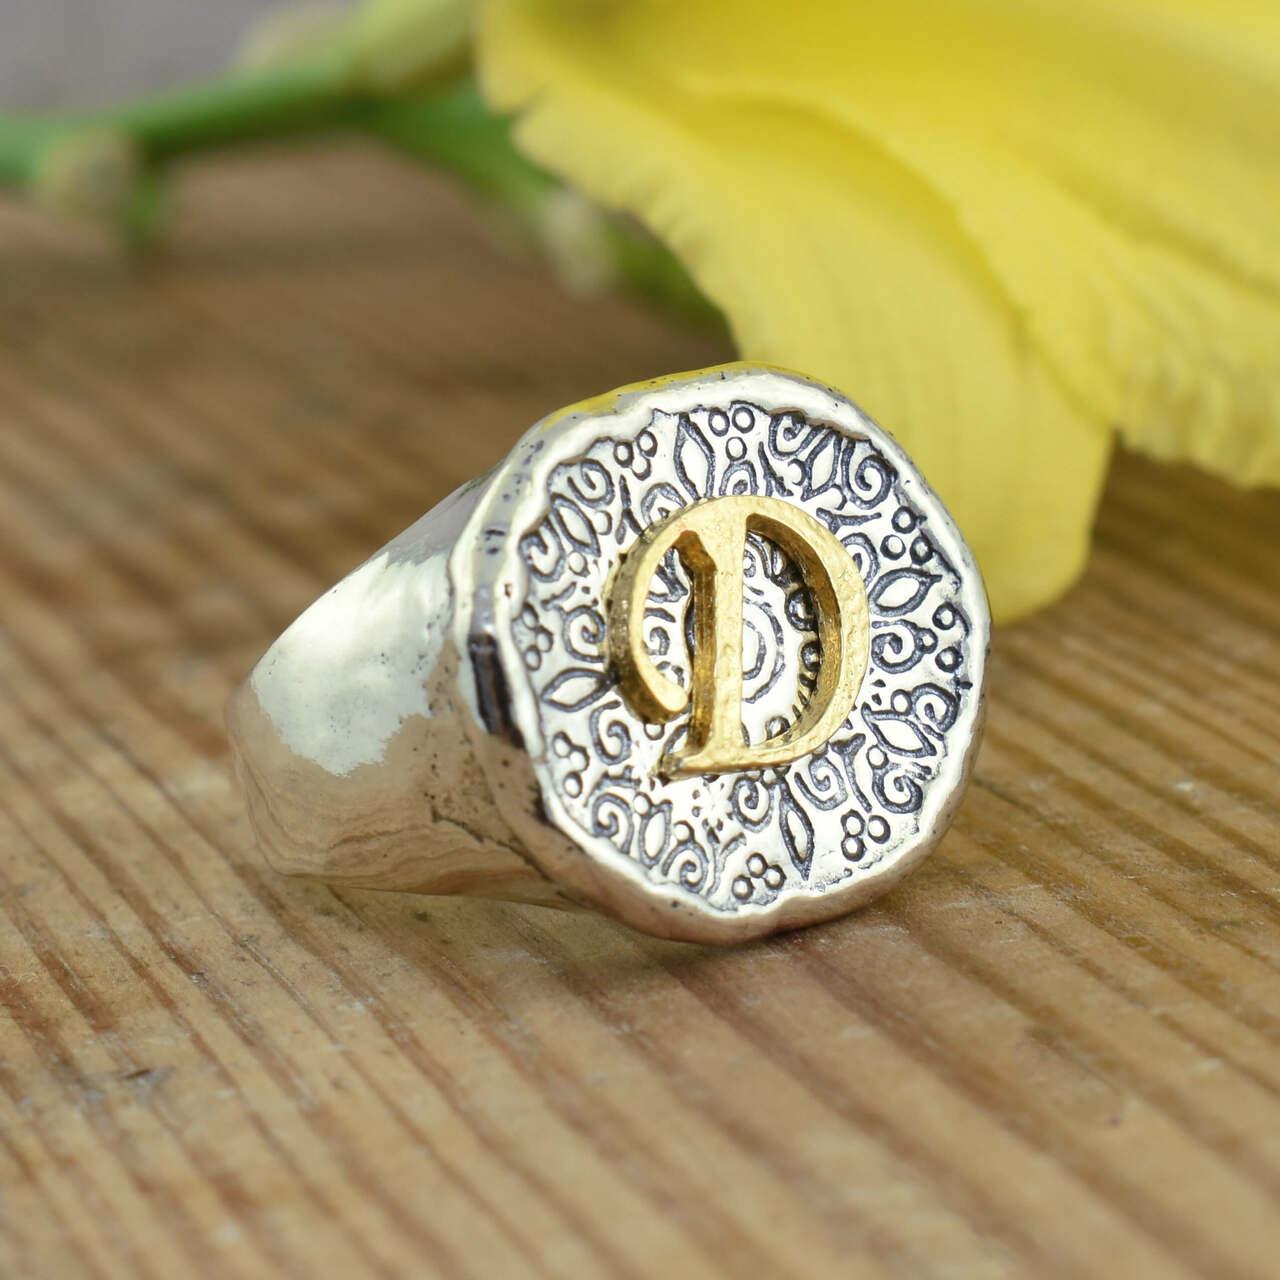 Signet initial ring with .925 sterling silver and gold plating